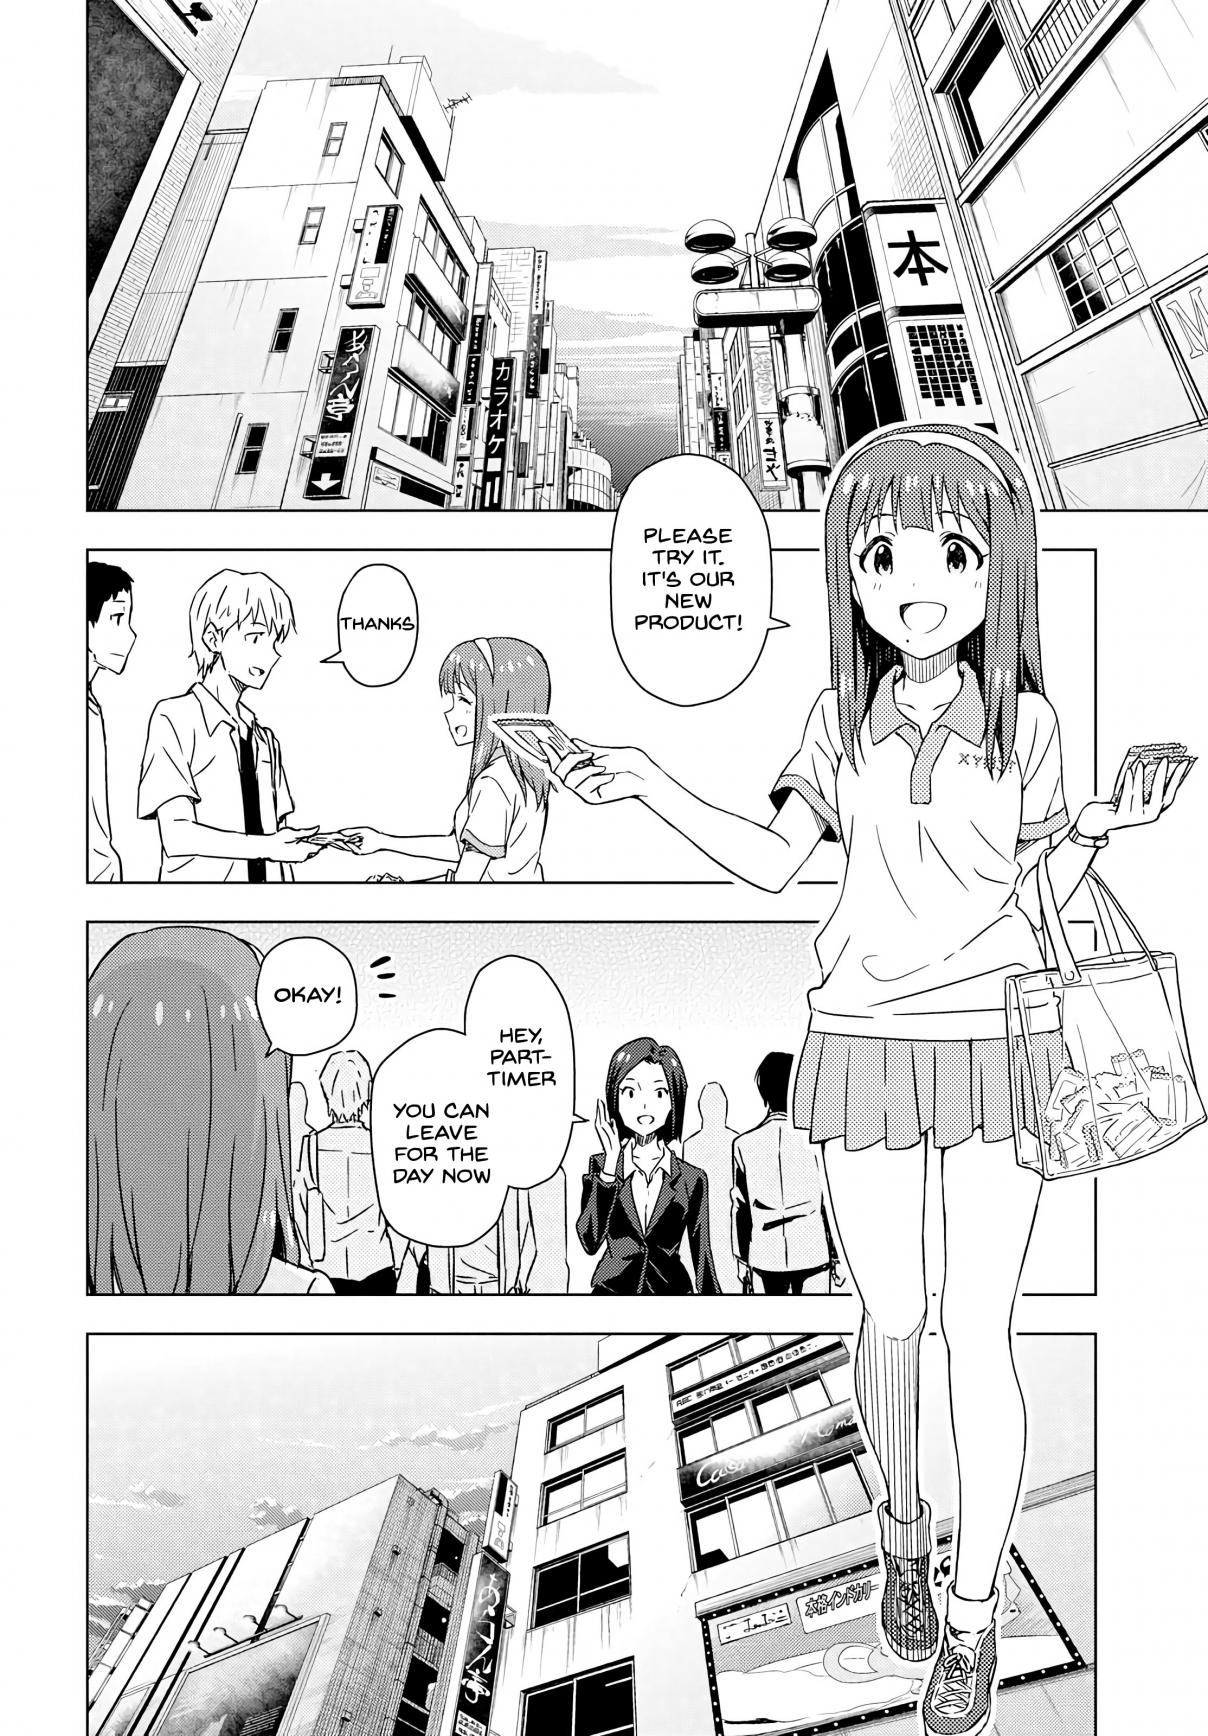 THE iDOLM@STER: Asayake wa Koganeiro Ch. 5 Carrying the Wishes of Her Mother… She Moves Forward.